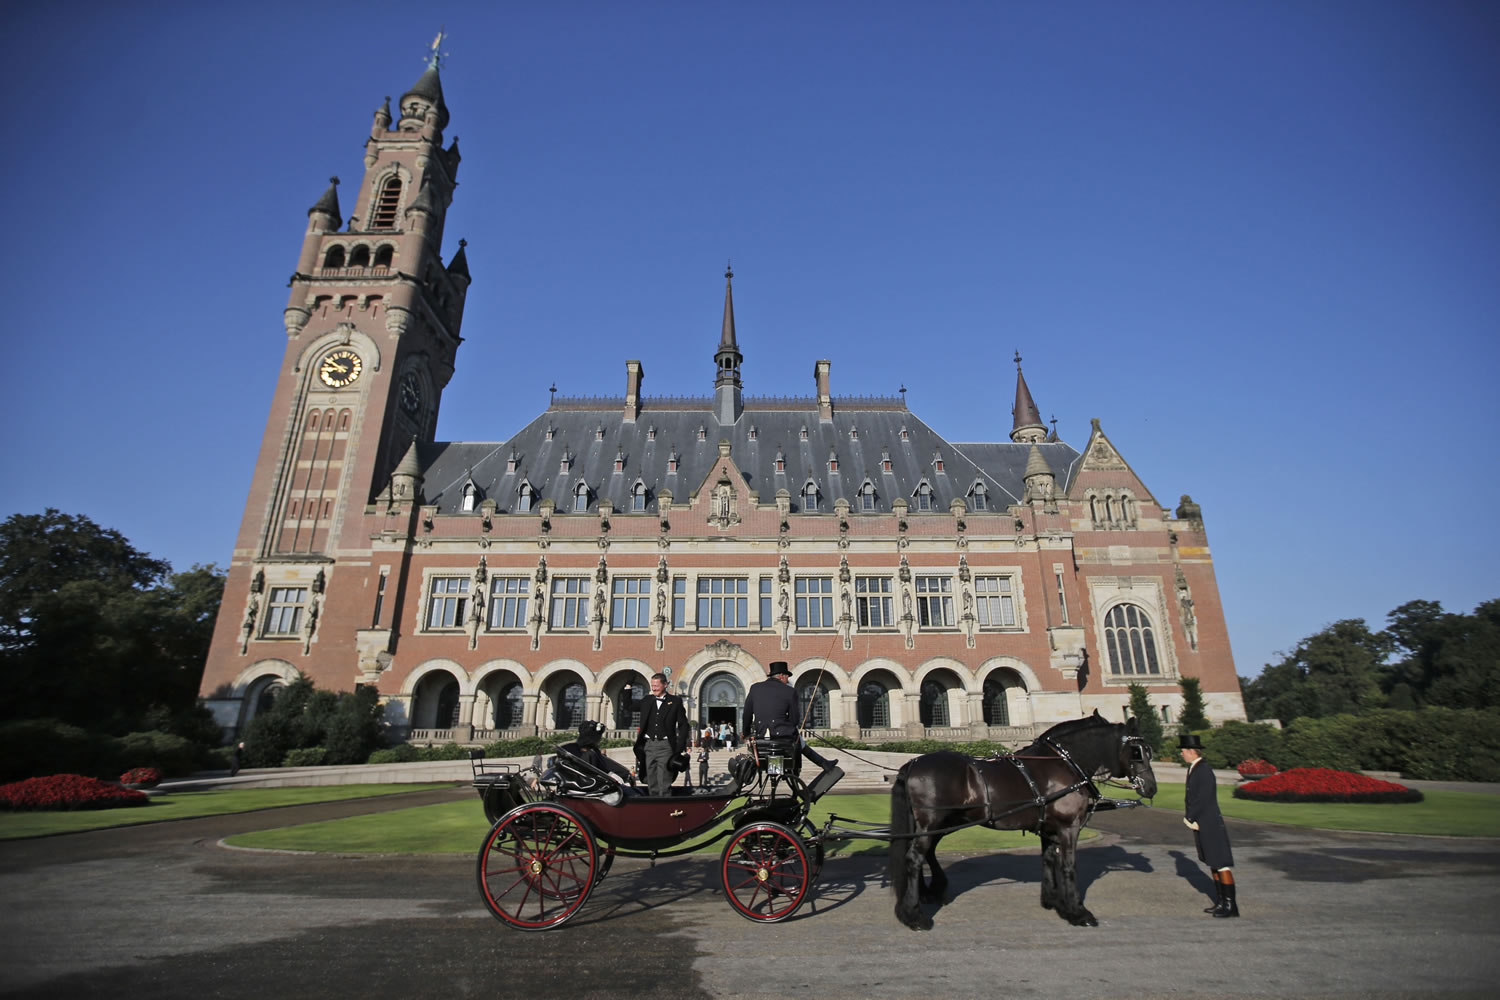 A horse-drawn carriage stands in front of the Peace Palace, seat of the International Court of Justice in The Hague, Netherlands.